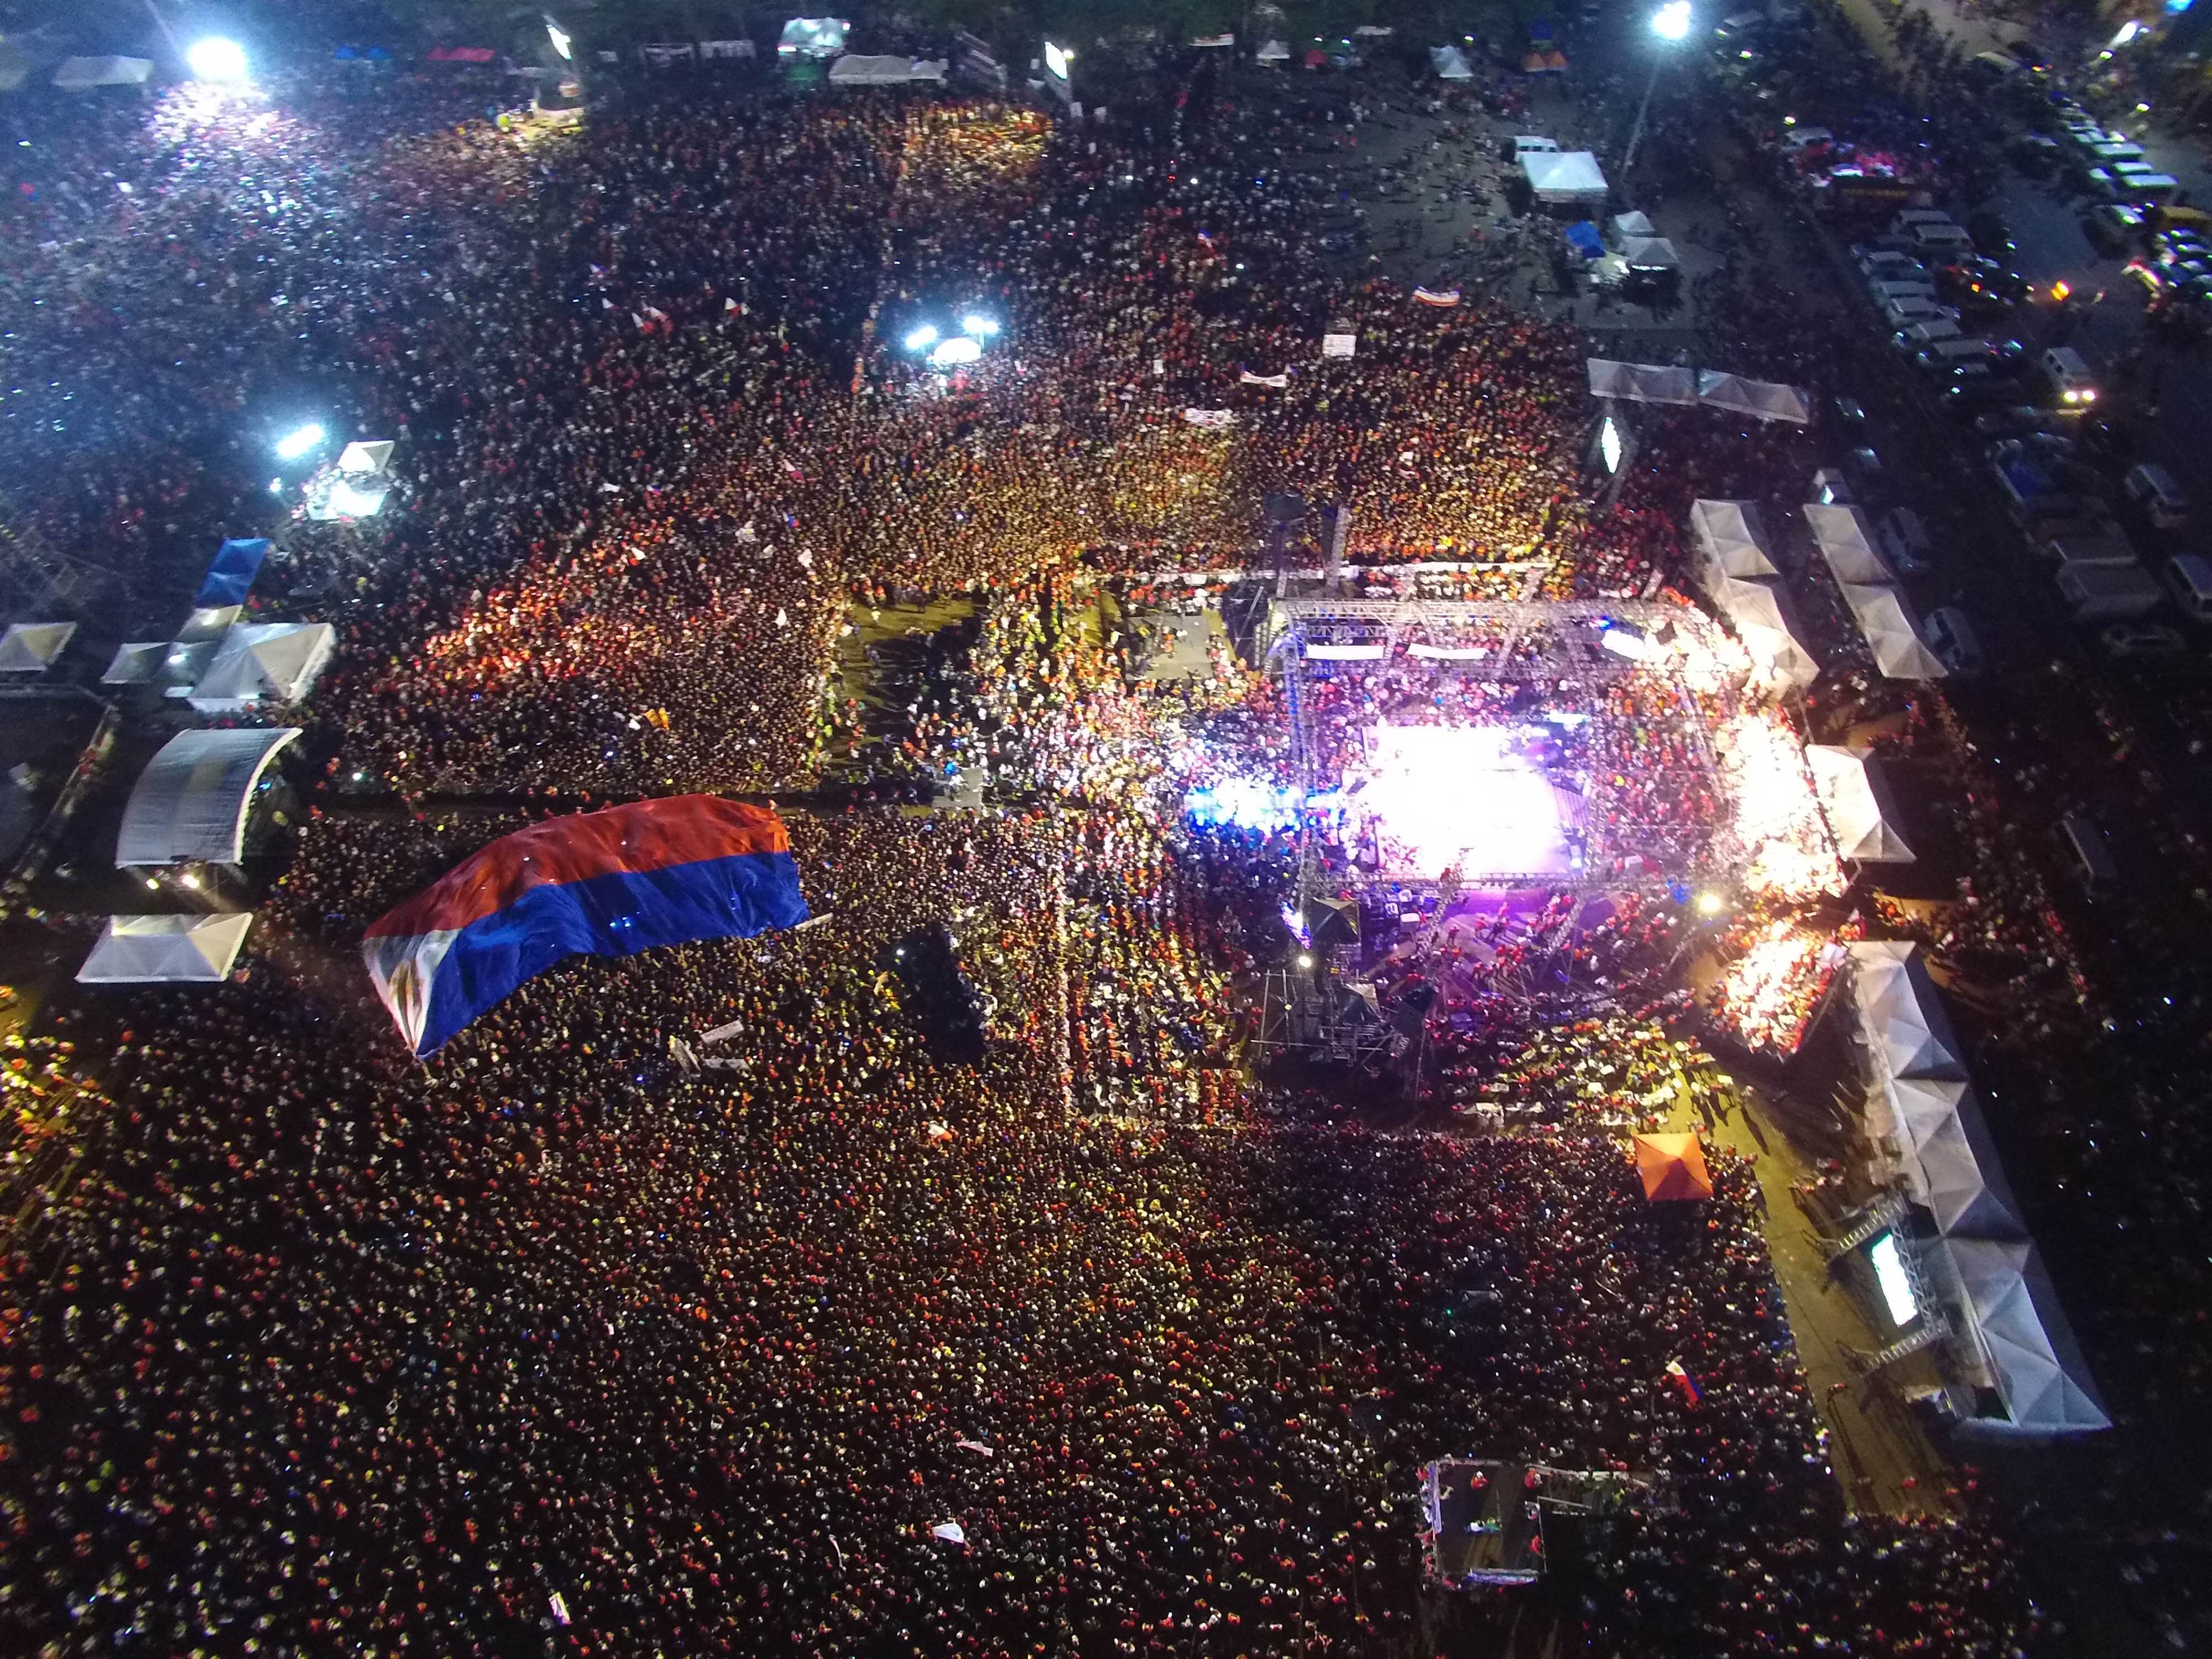 FESTIVE ATMOSPHERE. About 300,000 supporters show love for the candidates at the Duterte-Cayetano miting de avance. Photo by Cocoy Sexcion/EPA 